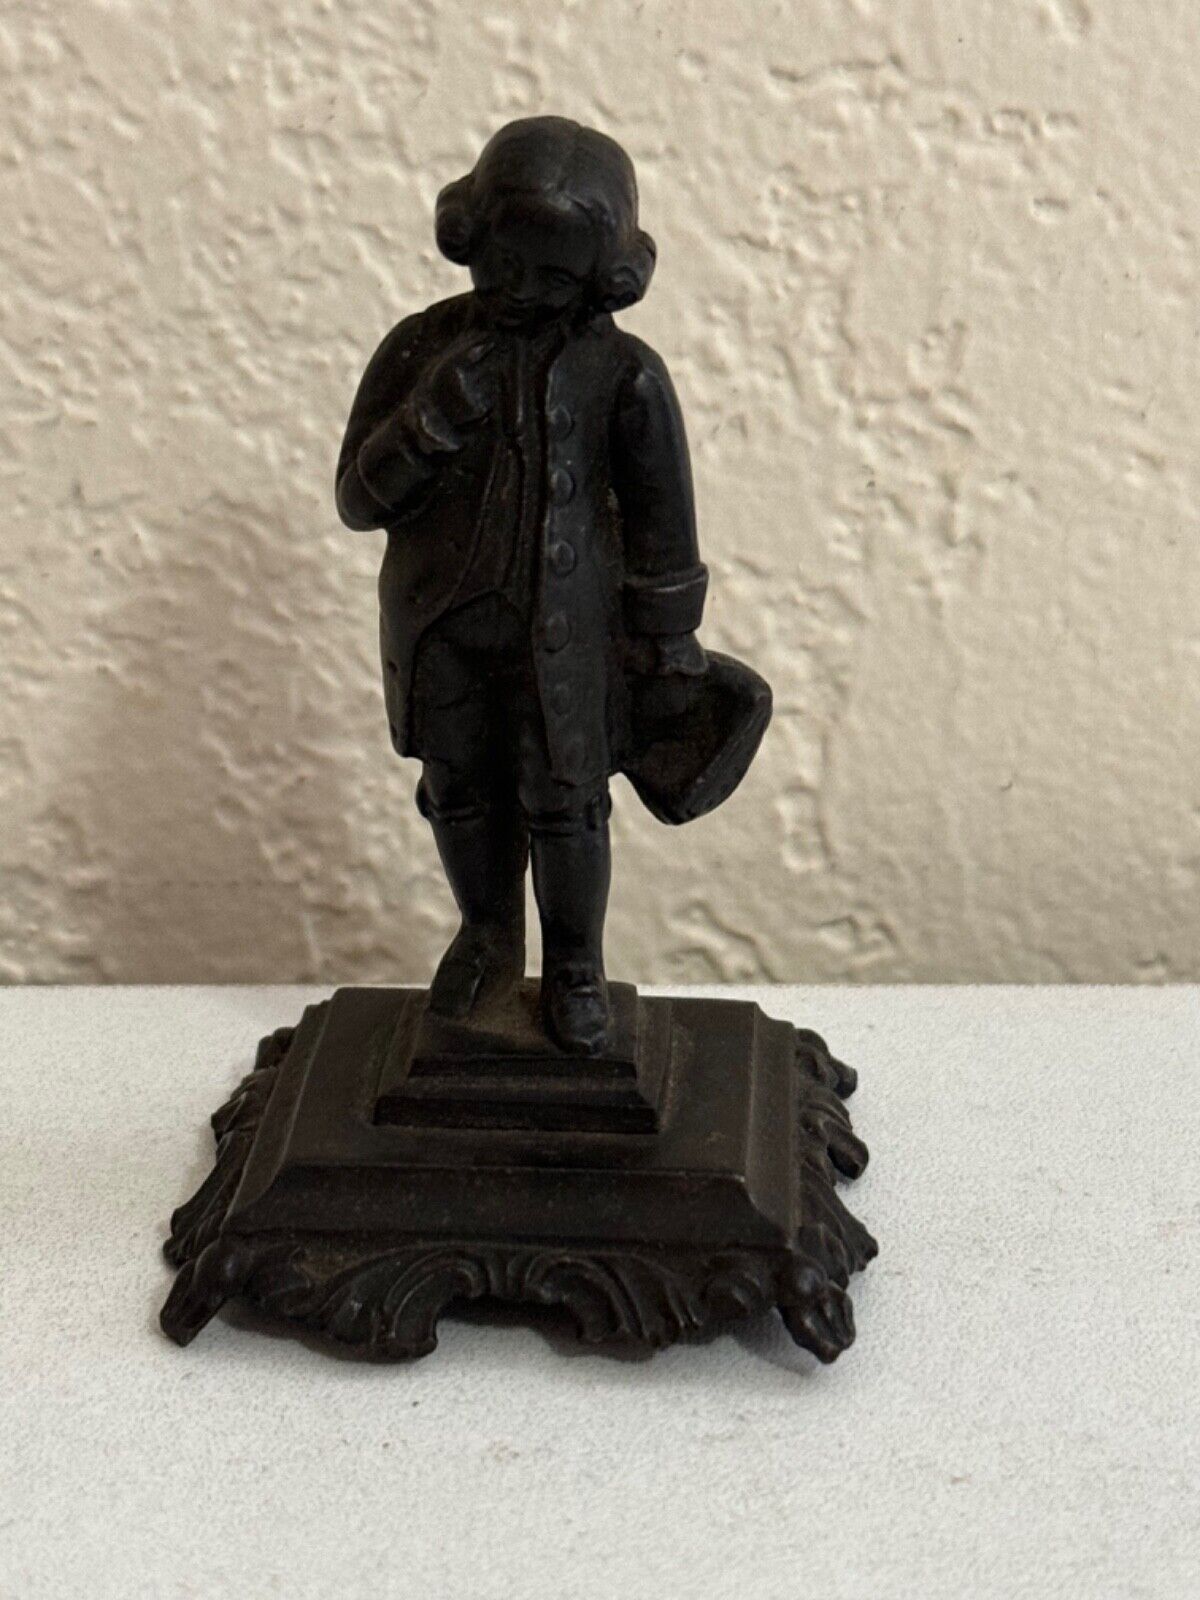 Vintage Antique Small Cast Metal Figurine Sculpture of Colonial Man Holding Hat